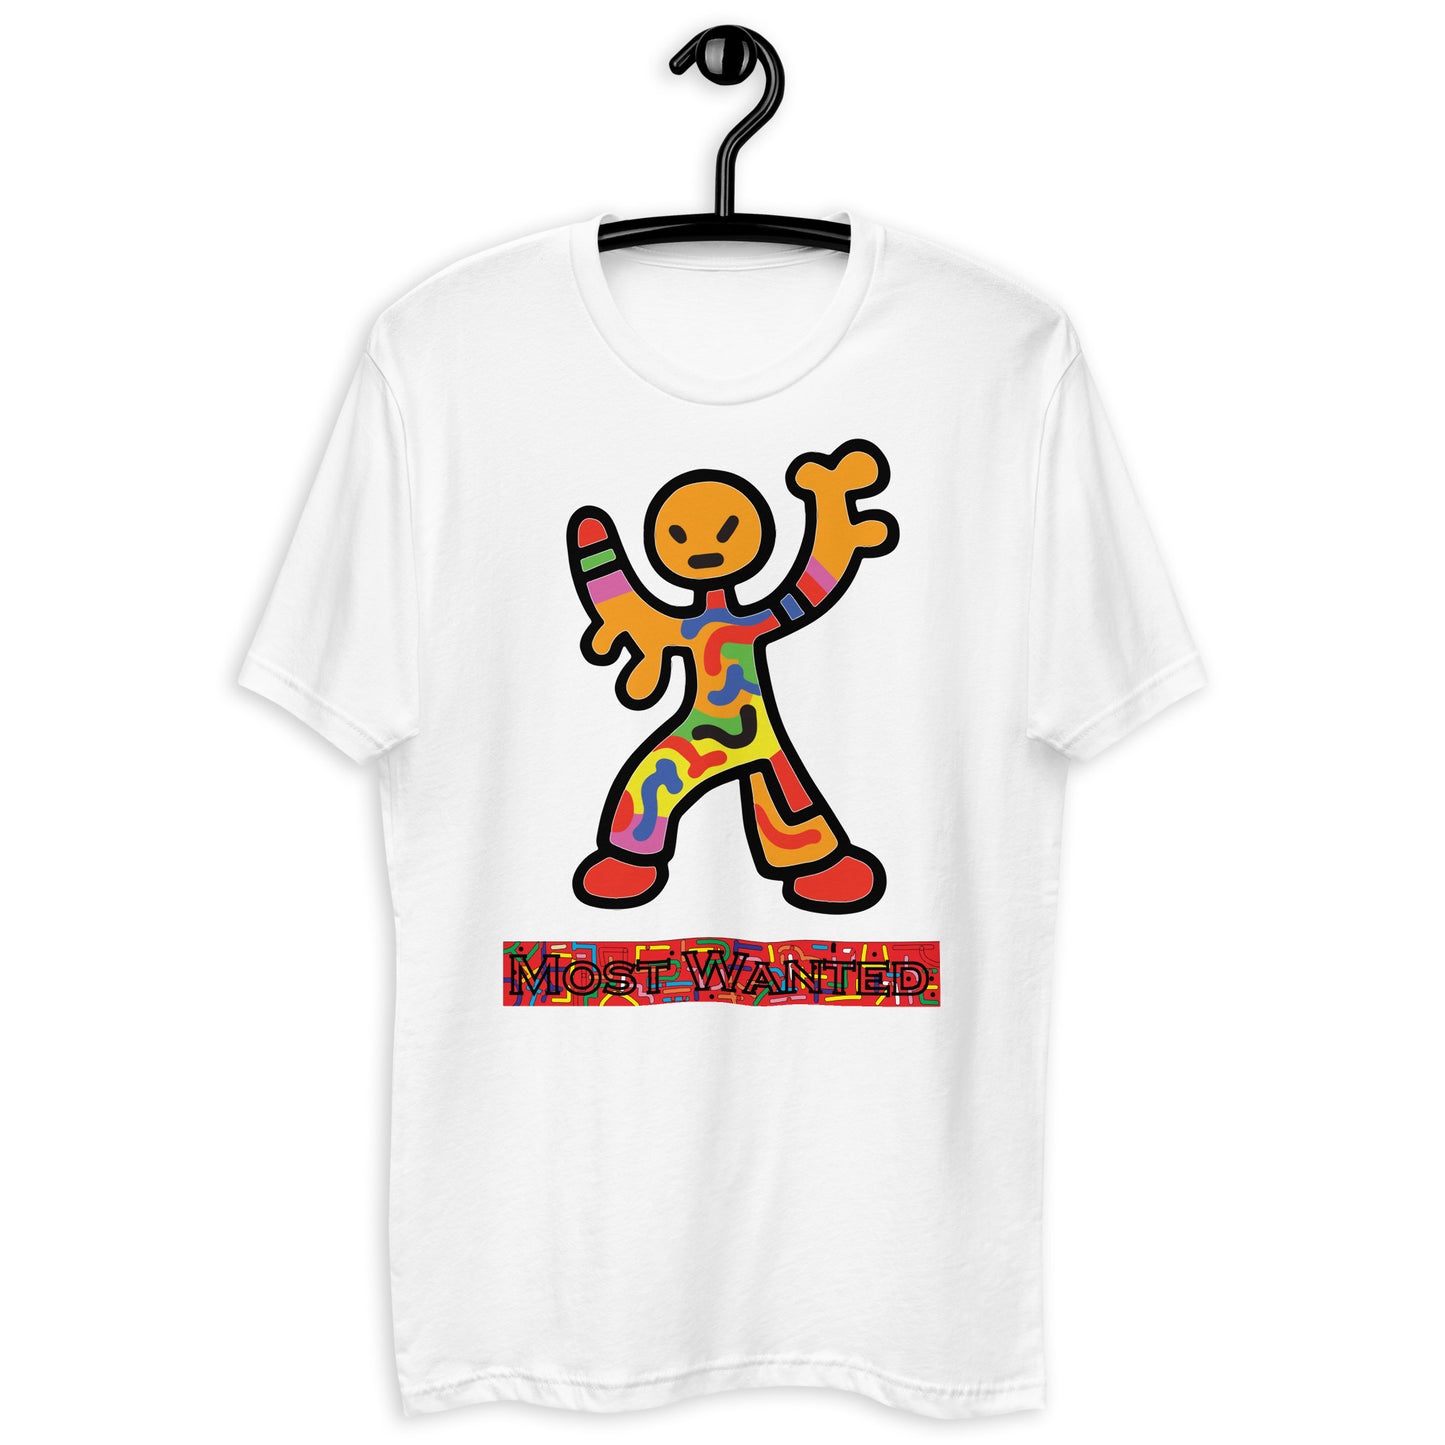 Doodles Me "Most Wanted" T-shirt #5